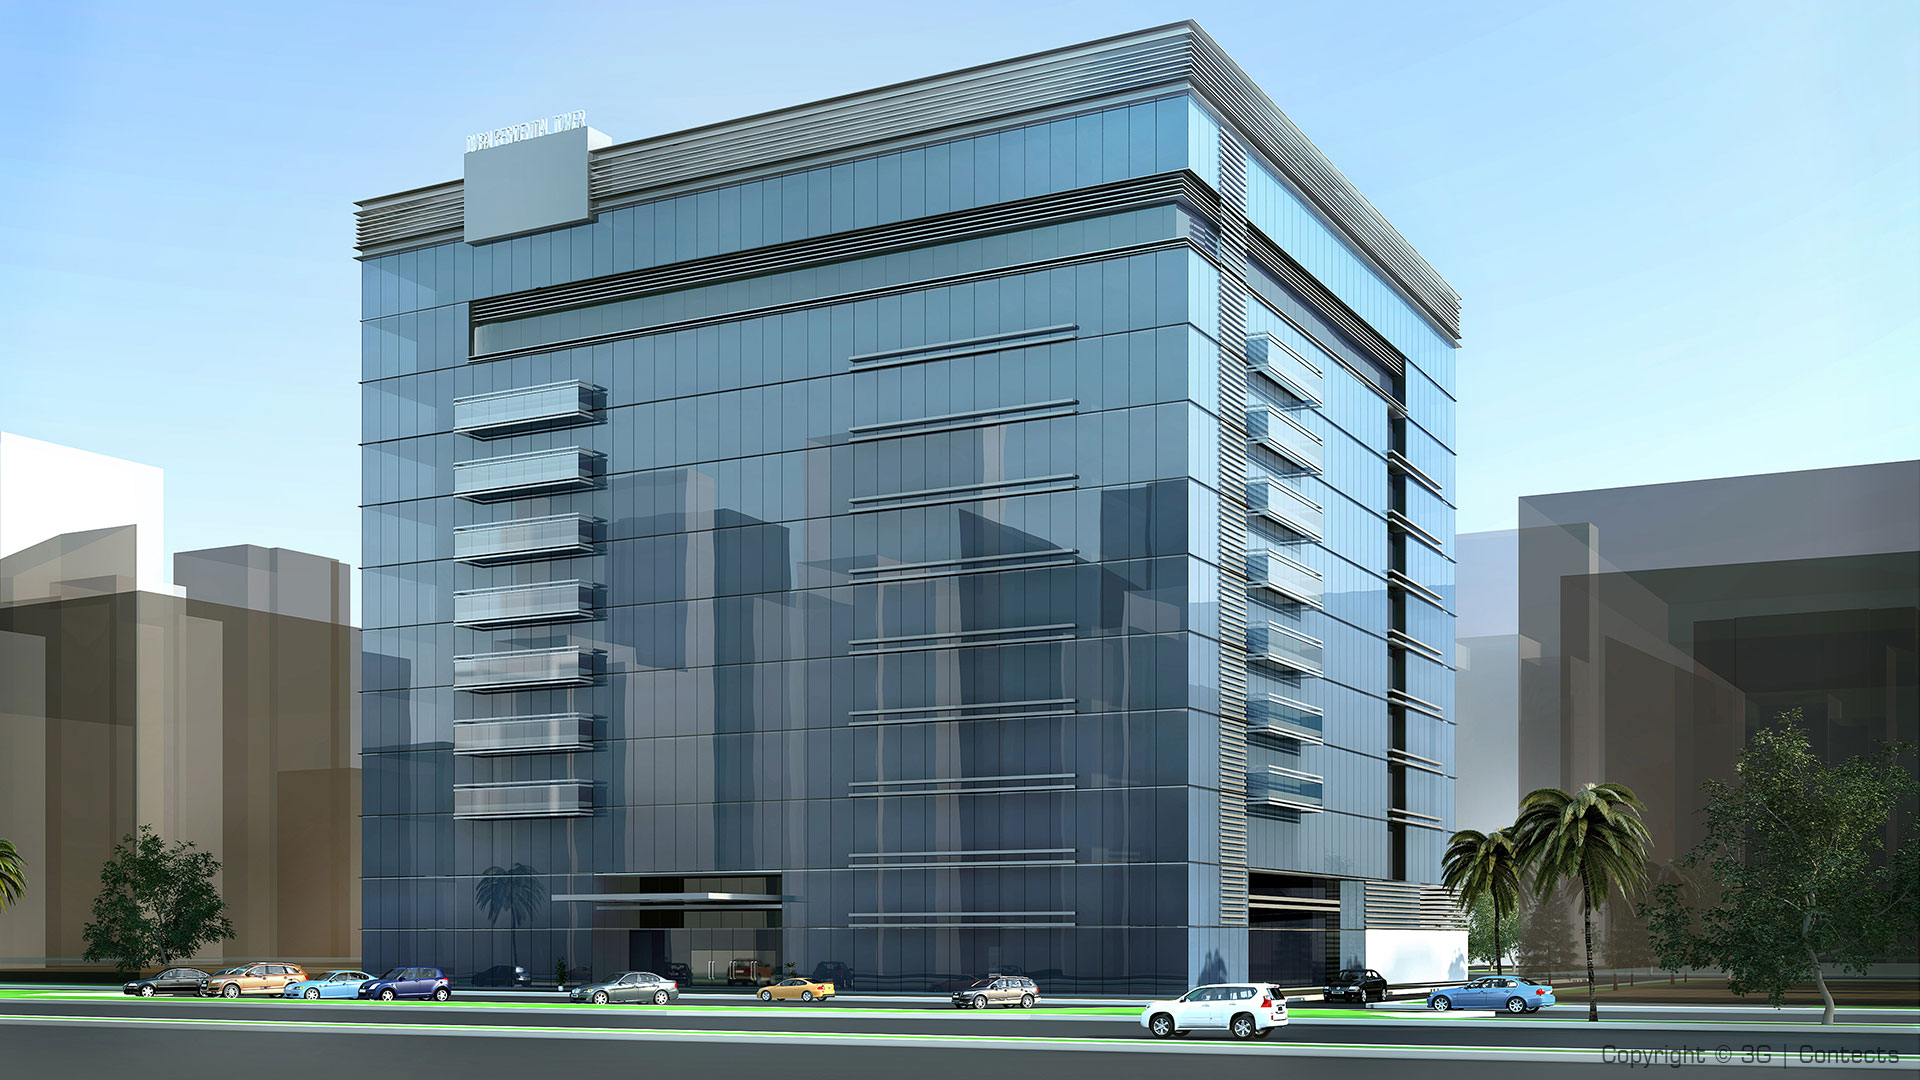 Dammam SAPL Residential and Infrastructure Project